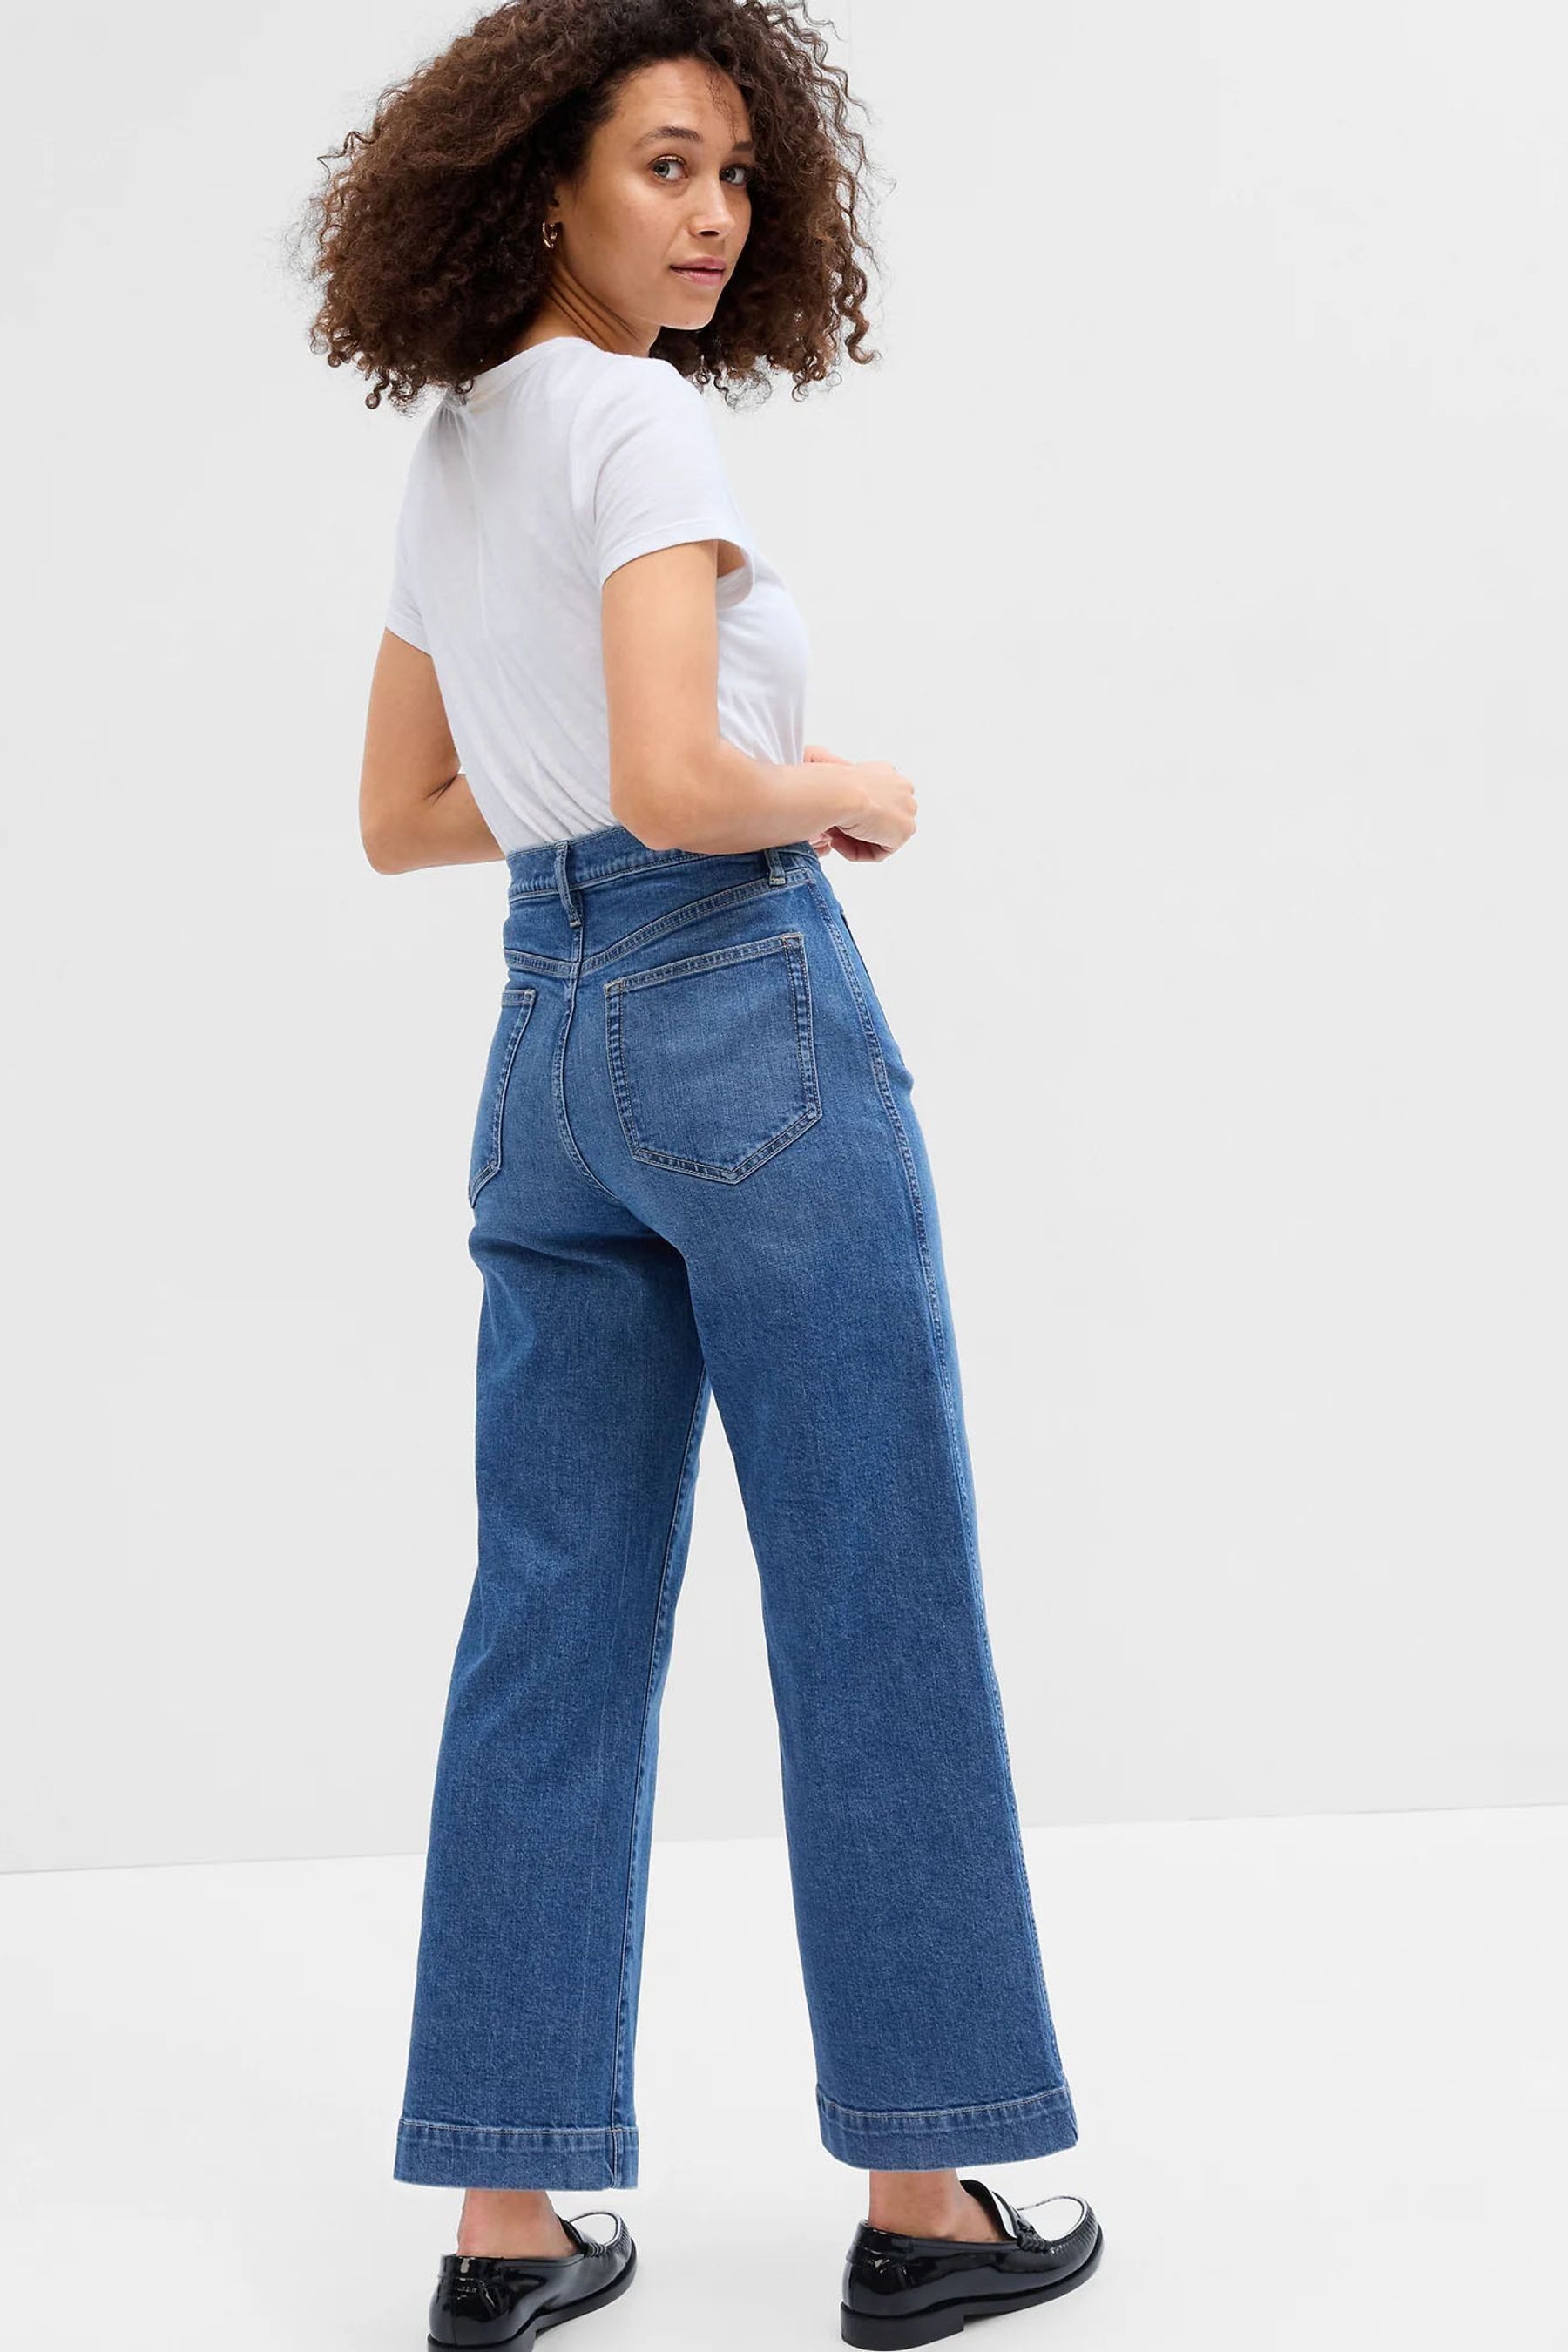 Buy Gap High Waisted Wide Leg Cropped Jeans from the Gap online shop